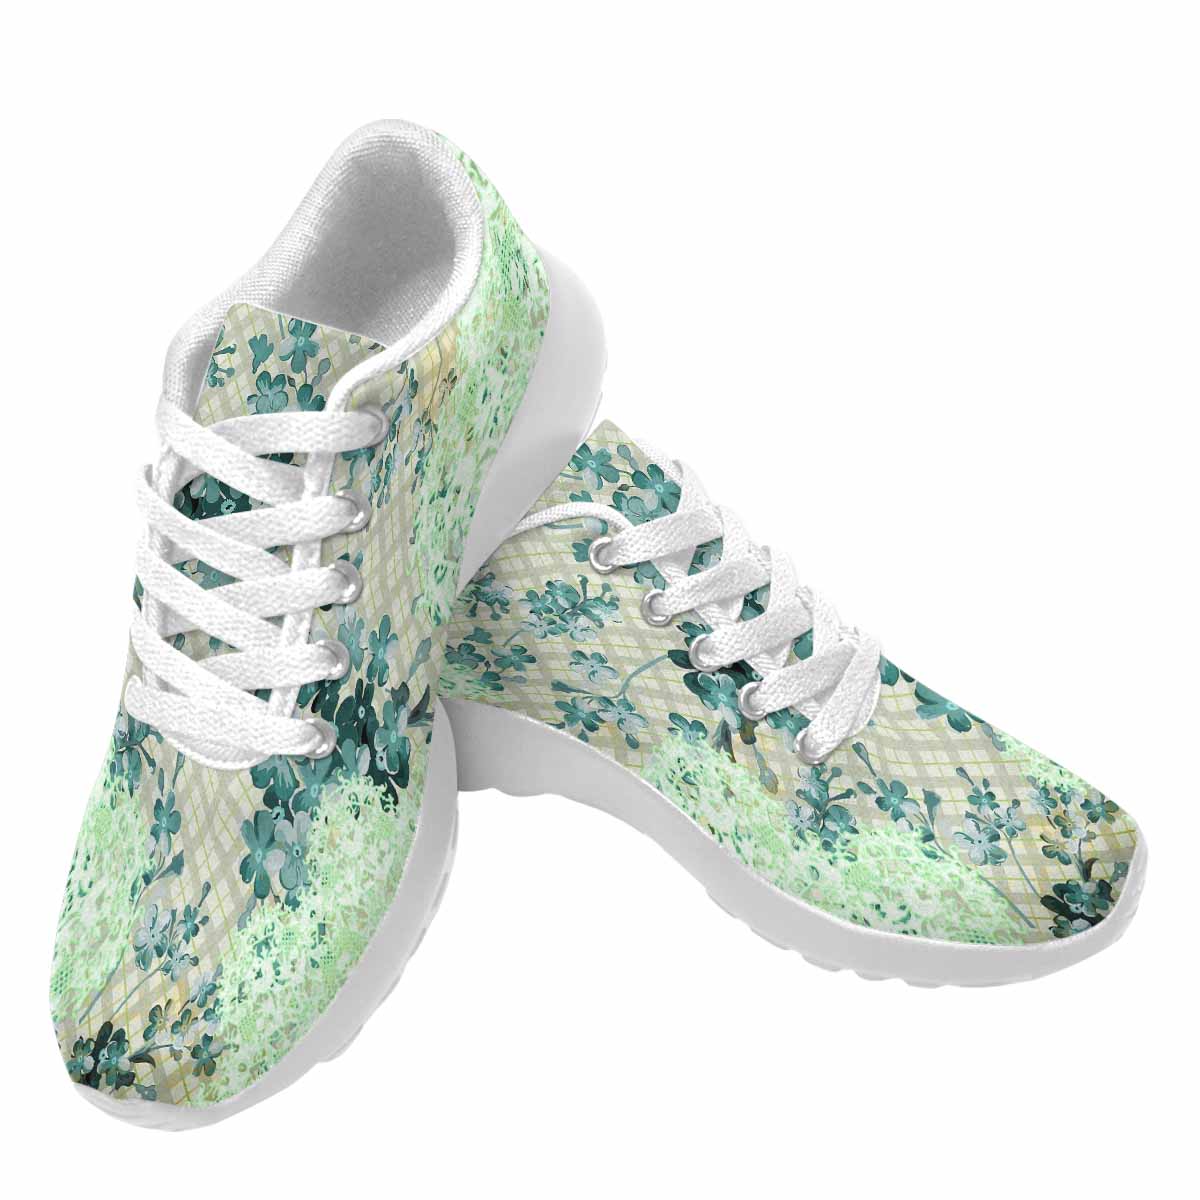 Victorian lace print, womens cute casual or running sneakers, design 53